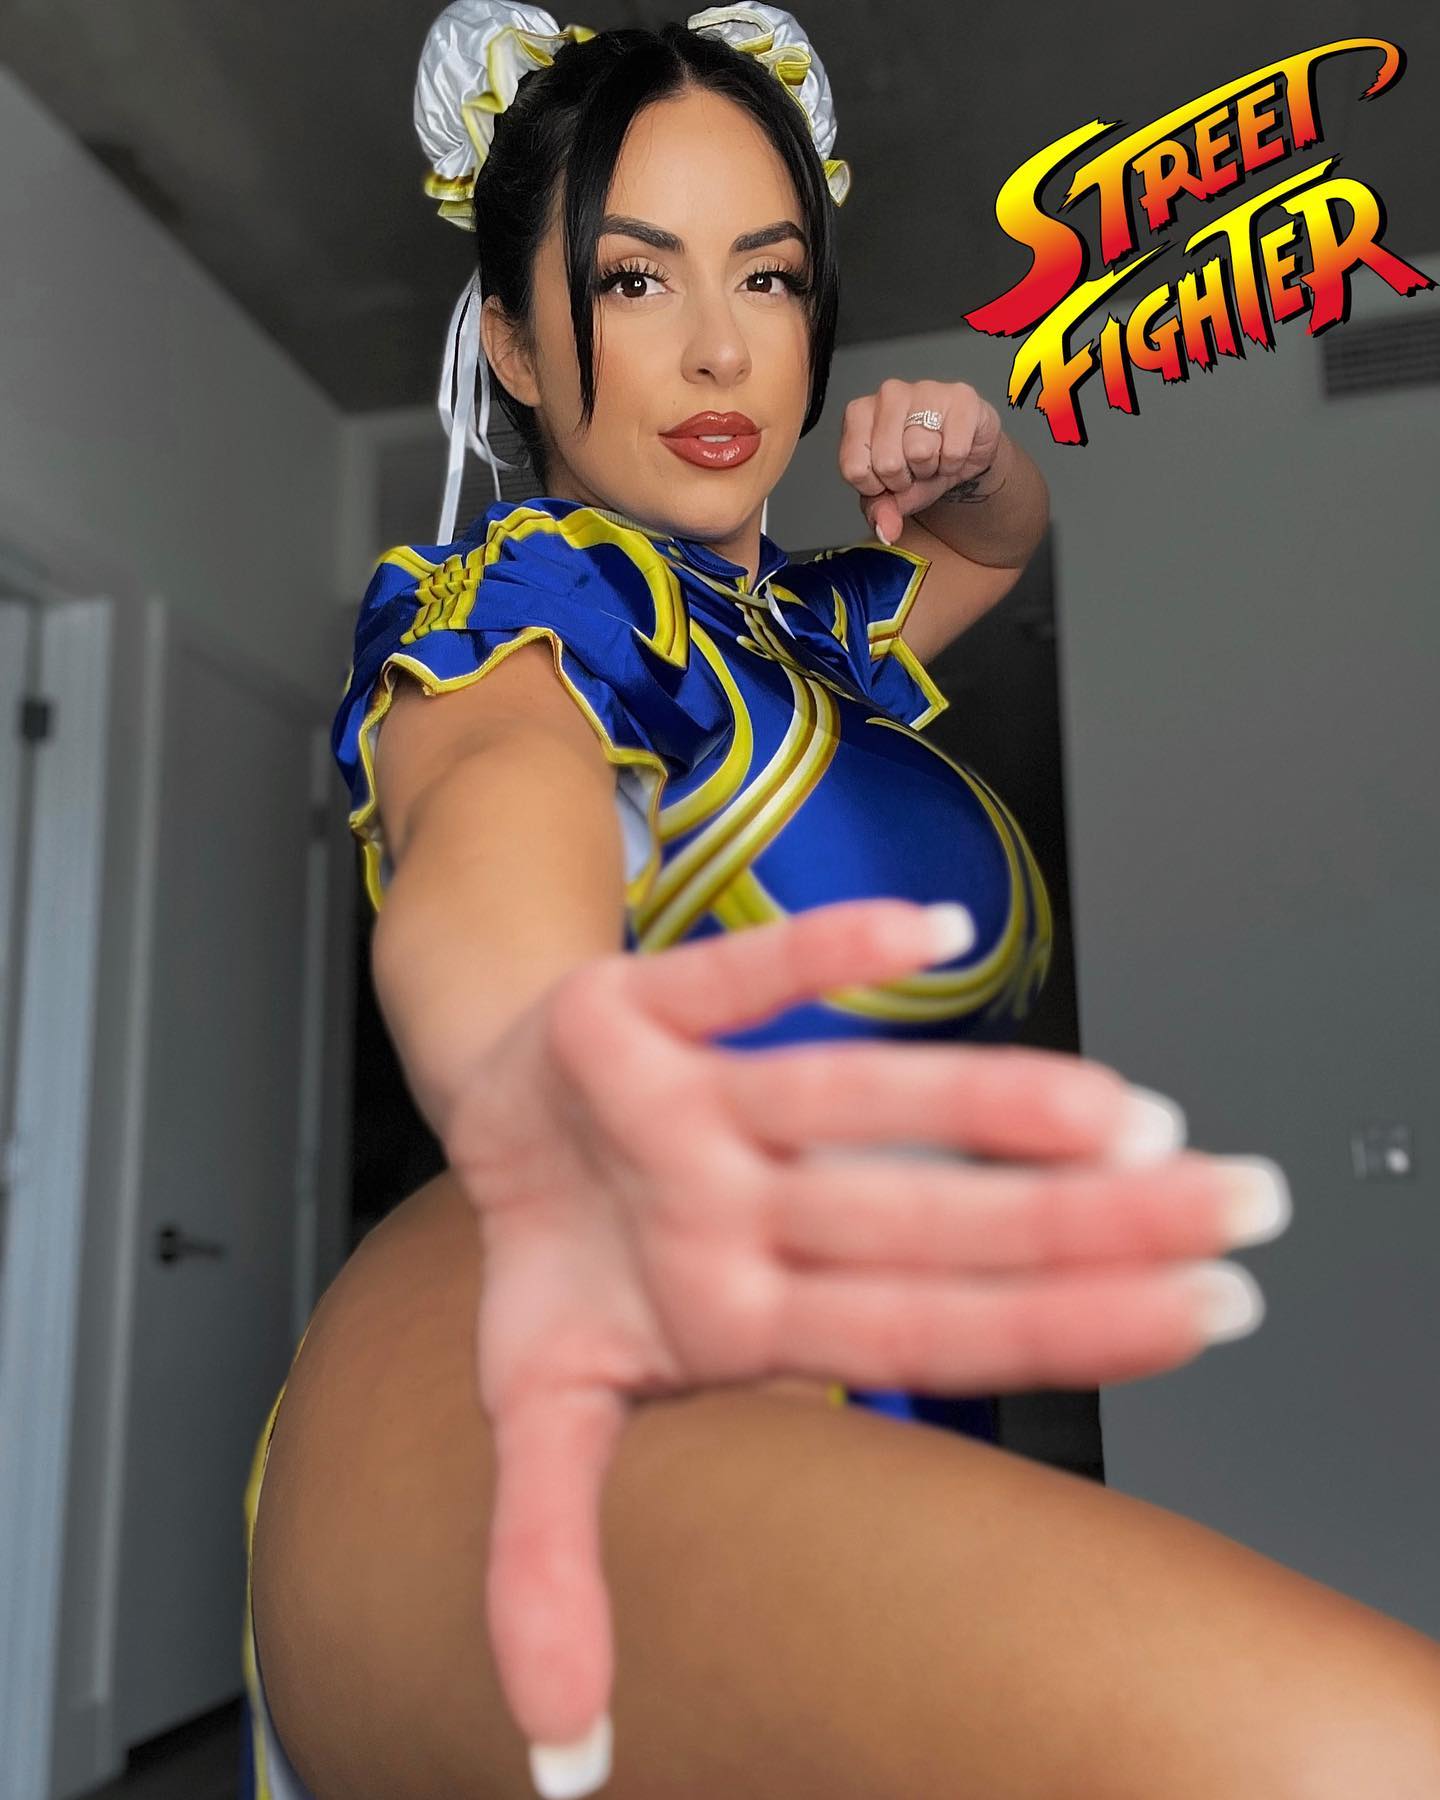 Chun Li 💙

✨I’m back in a new and improved Chun Li cosplay!! One day I’ll take high quality photos of this cosplay because I love it so much she’s one of my favs. 

👊🏼Should I bring back Cammy and do a side by side of my Chun Li and Cammy White??
•
•
•
•
•
•
#chunli #chunlicosplay #chunlicosplayer#streetfighter #streetfightercosplay #cosplaygirl  #cosplayergirl #womenofcosplay #cosplaylife #cosplaylove #femalecosplayer #thiccwomen #thicccosplayer #cosplaysexy #sexycosplayer  #sexycosplay #cosplaygirls #cosplayersofig #cosplaymodel  #cosplaying #girlsofcosplay #geekgirls #nerdgirls